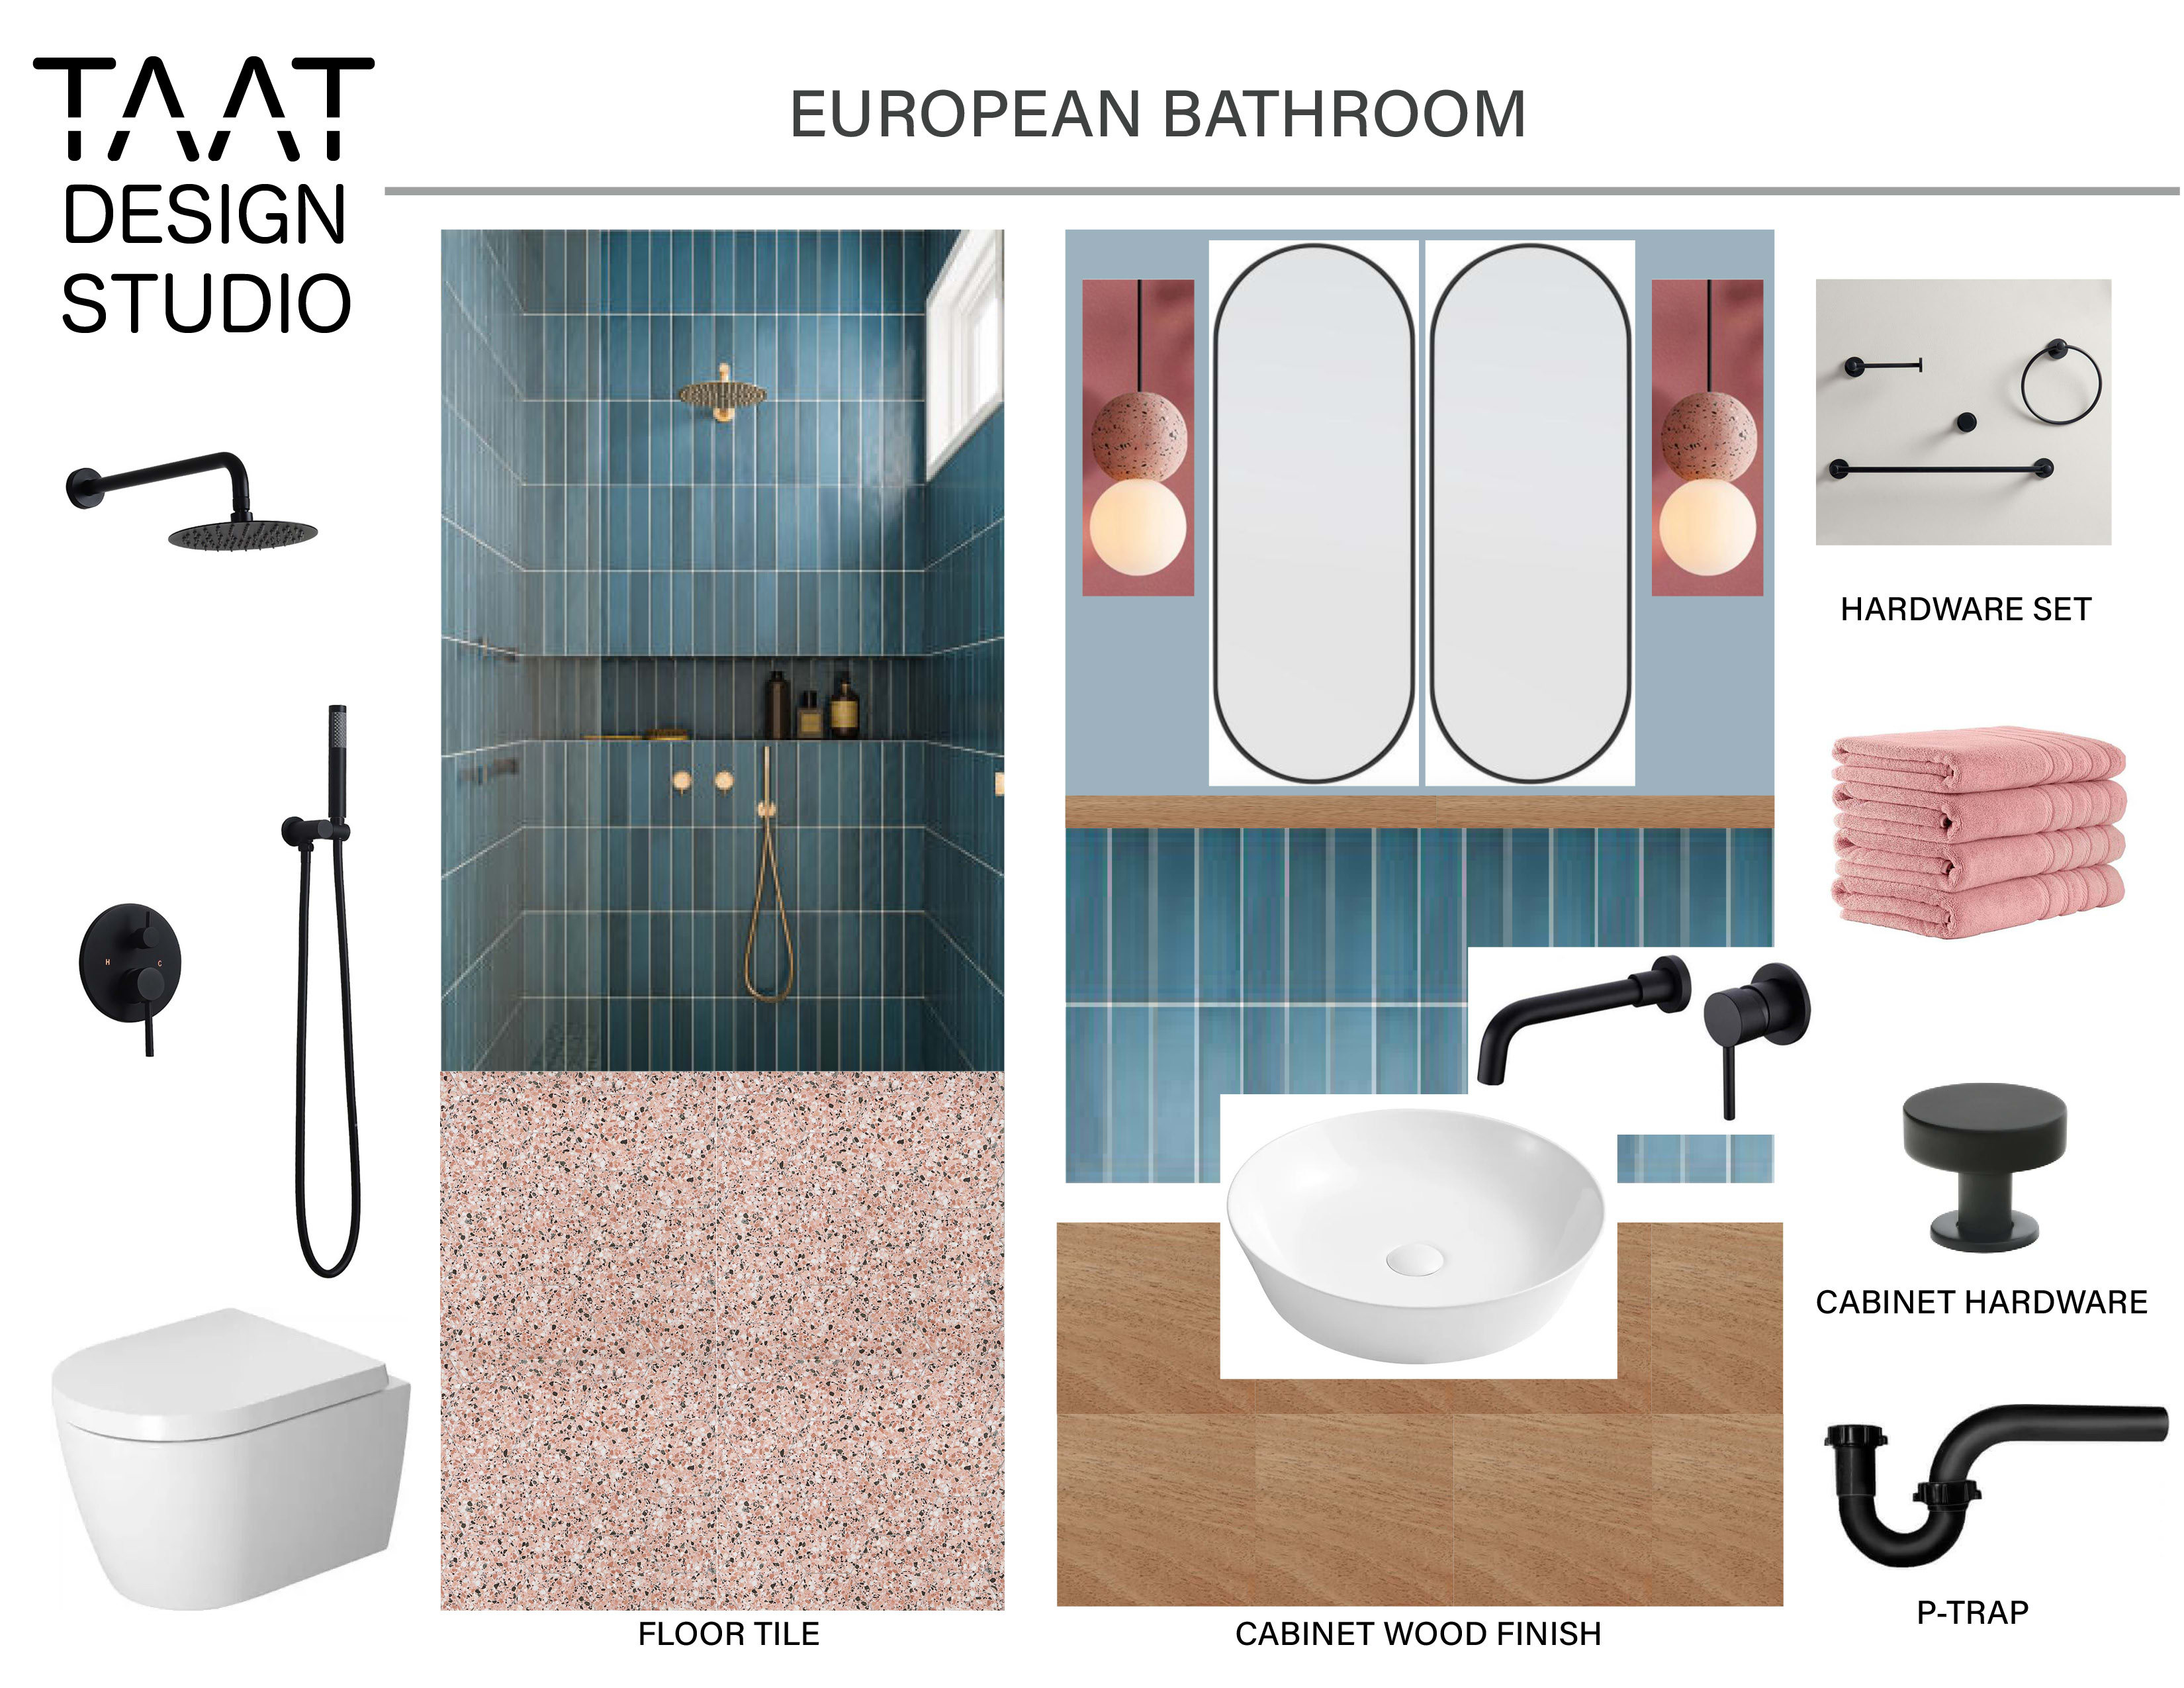 Category/Concept Boards - Things in the Bathroom